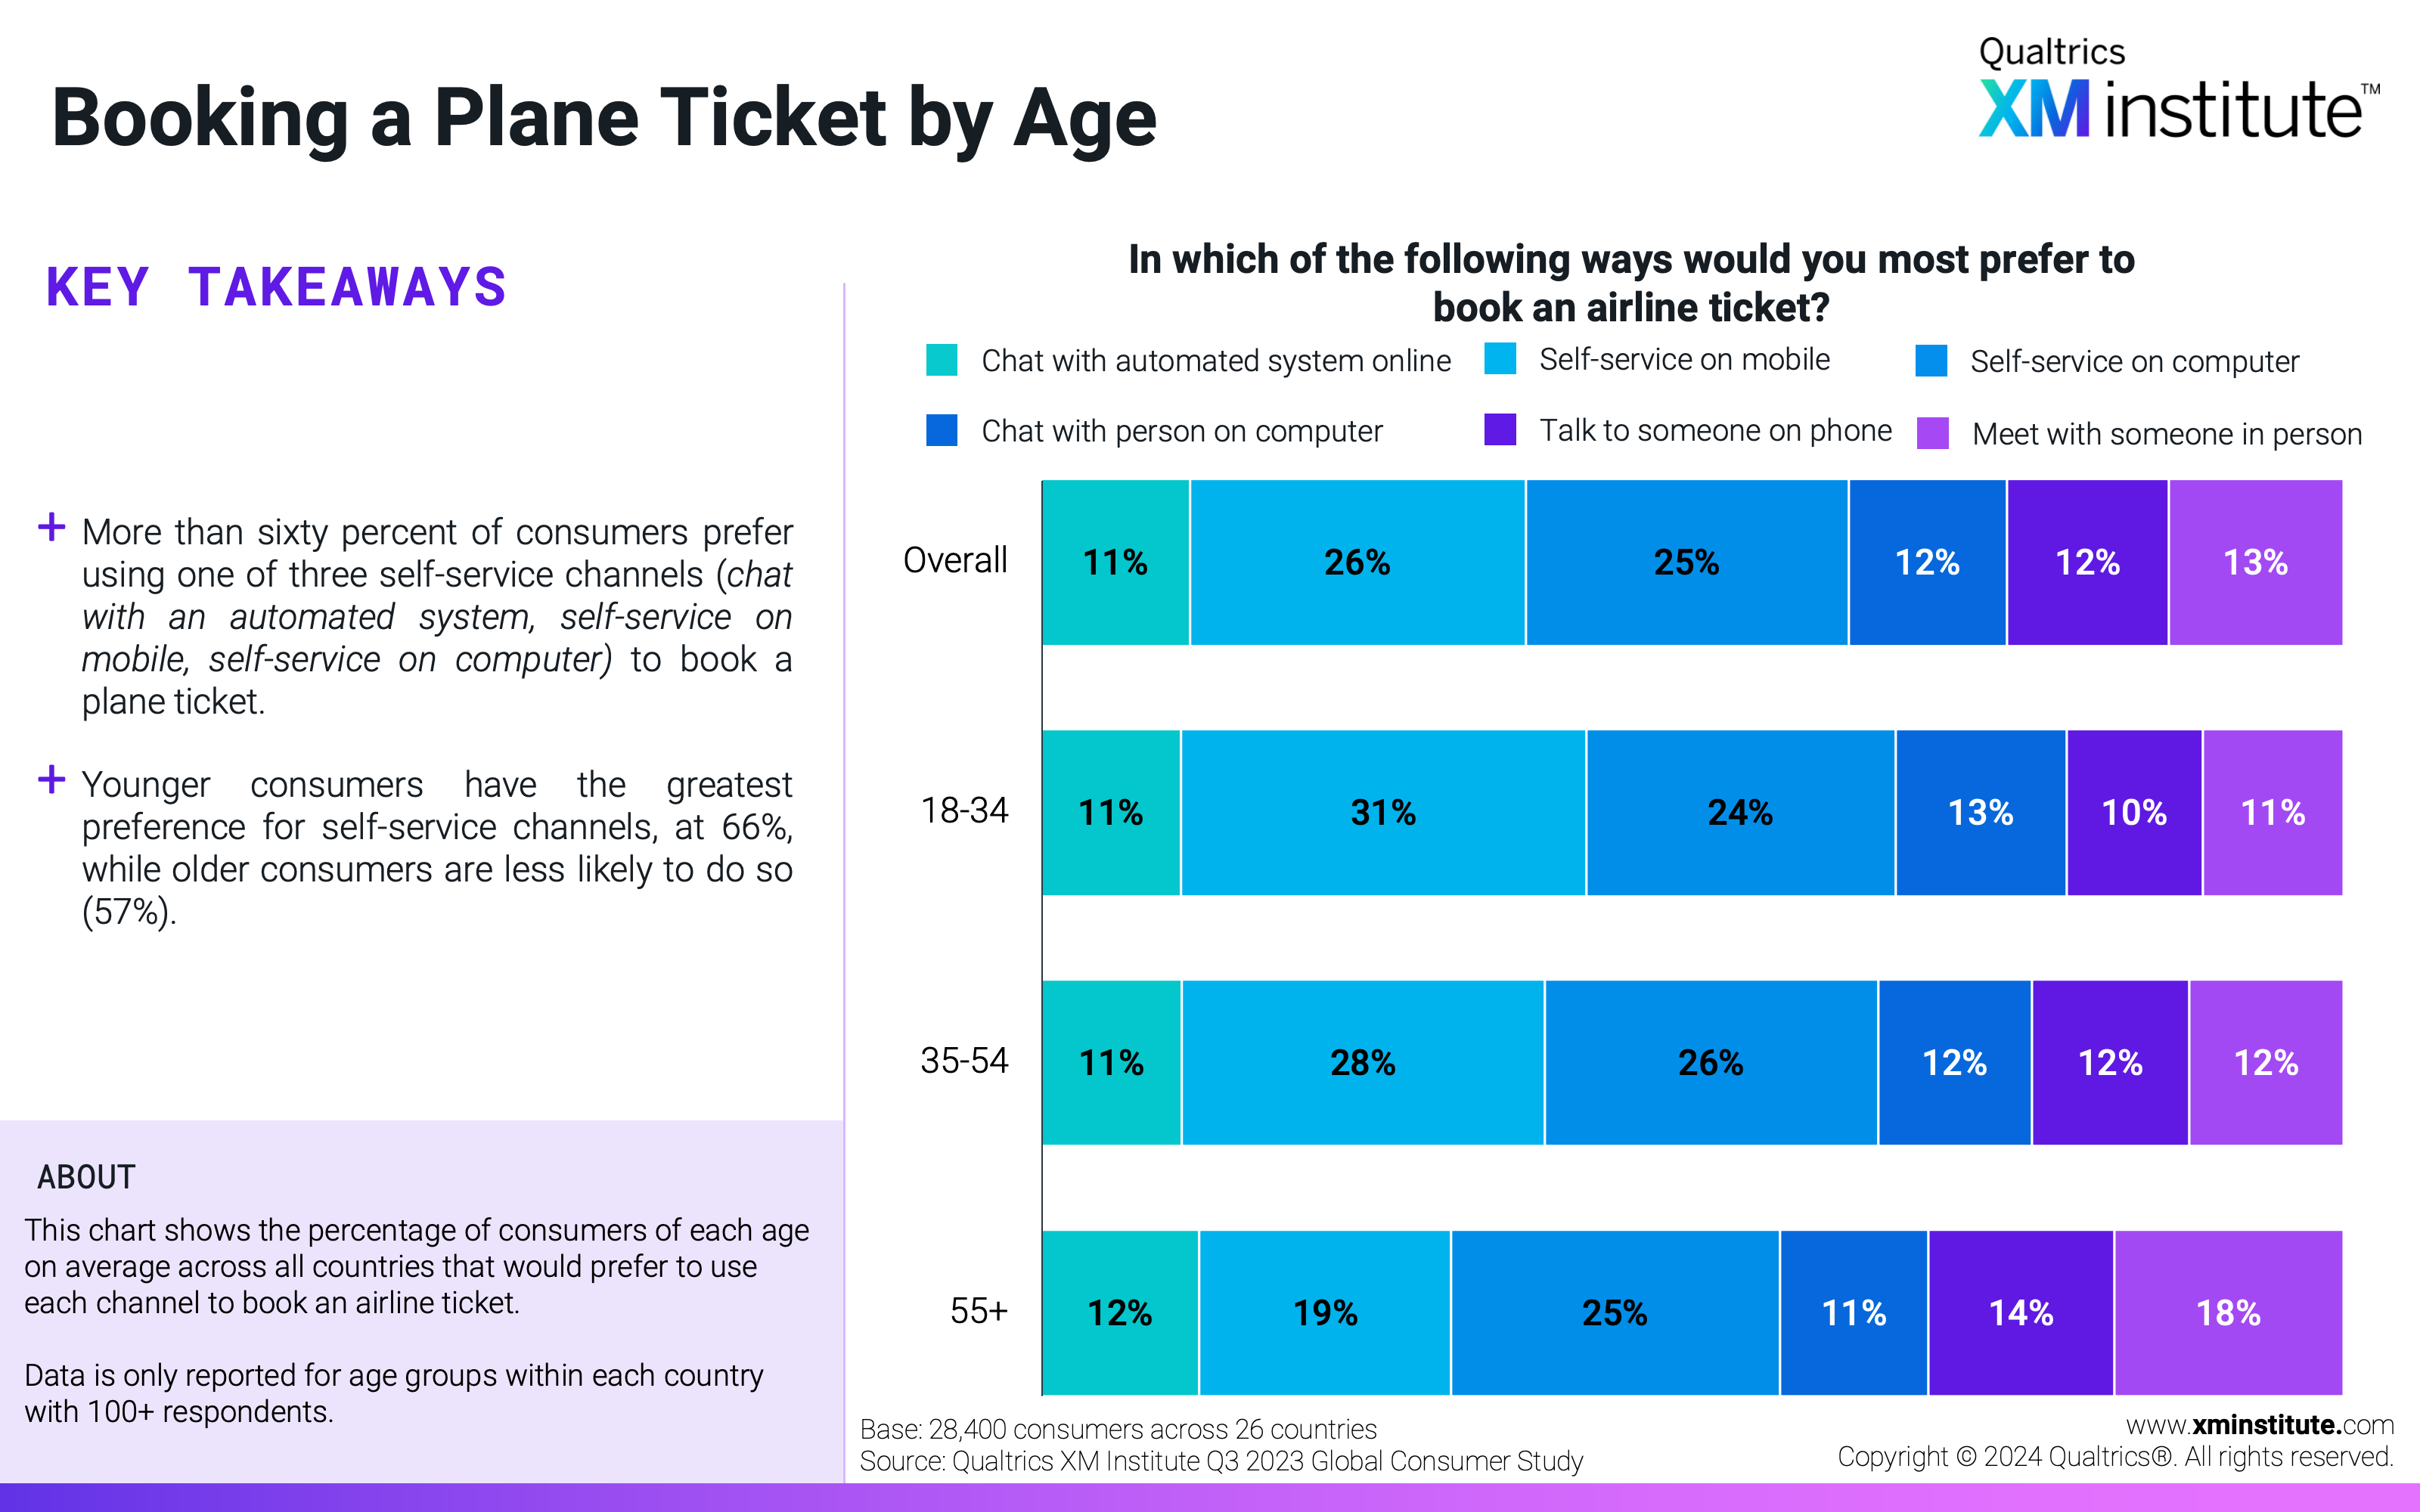 This chart shows the percentage of consumers of each age on average across all countries that would prefer to use each channel to book an airline ticket. 